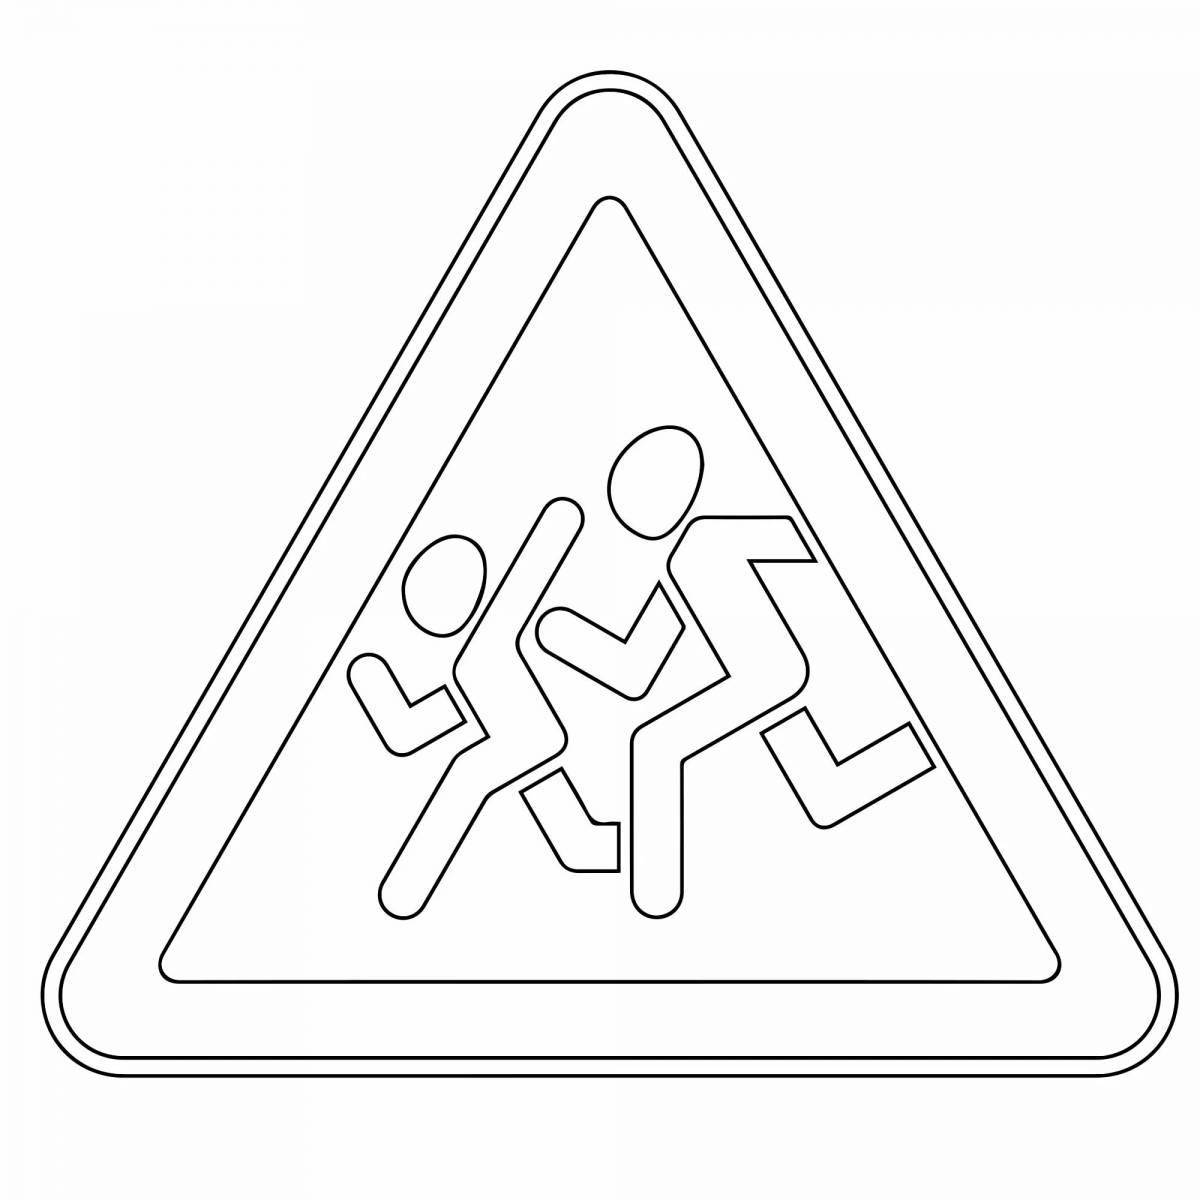 Joyful road signs coloring pages for schoolchildren